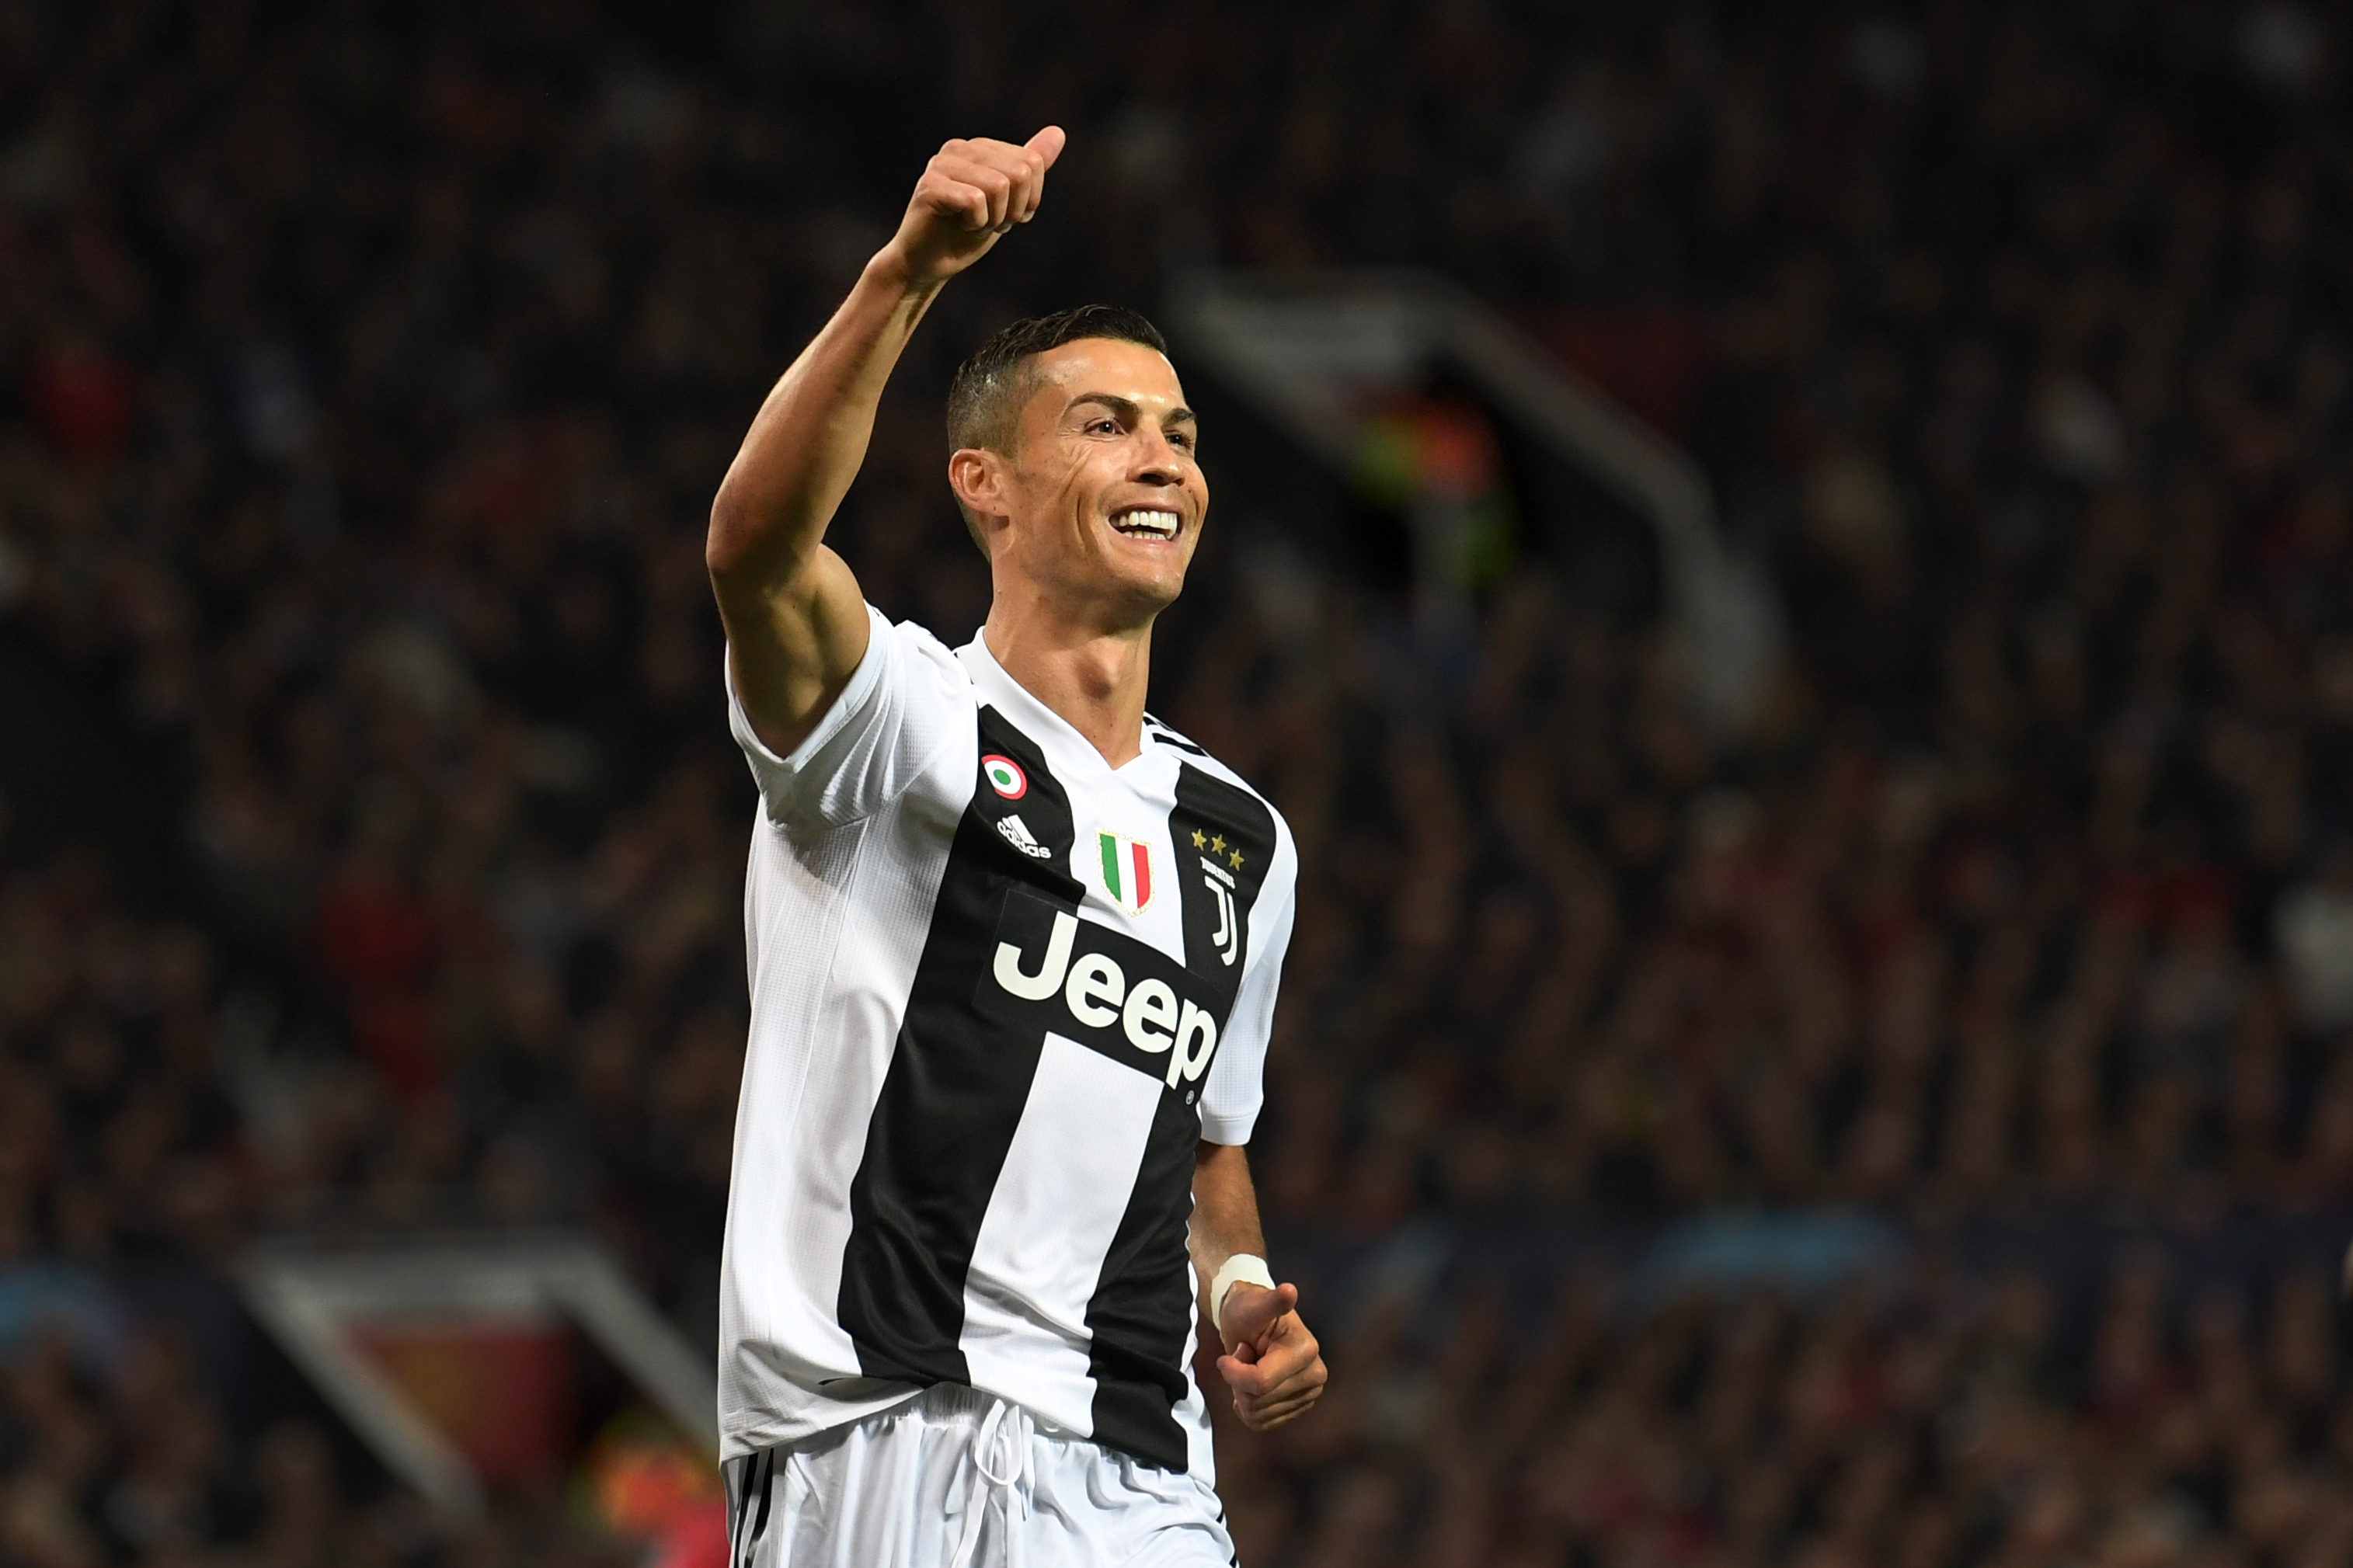 Cristiano Ronaldo news & latest pictures from Newsweek.com